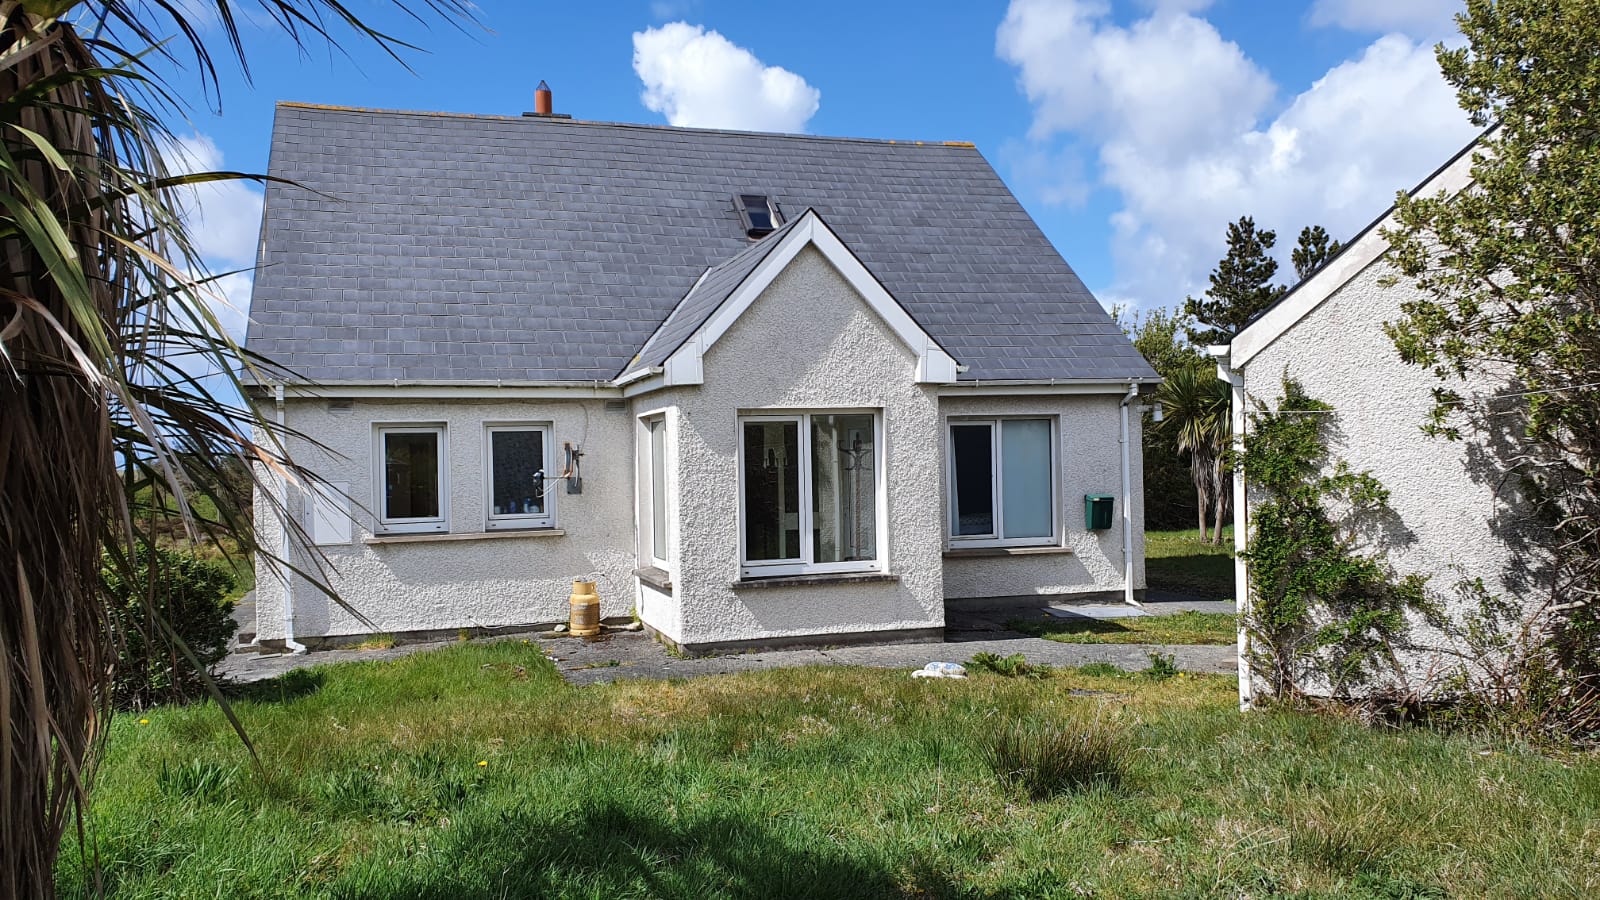 LACKENAGH, BURTONPORT – (F94 C5D6)  A 3 Bedroom Bungalow with  magnificent views of Arranmore Island, Inishfree Island, Dungloe Bay and Maghery.